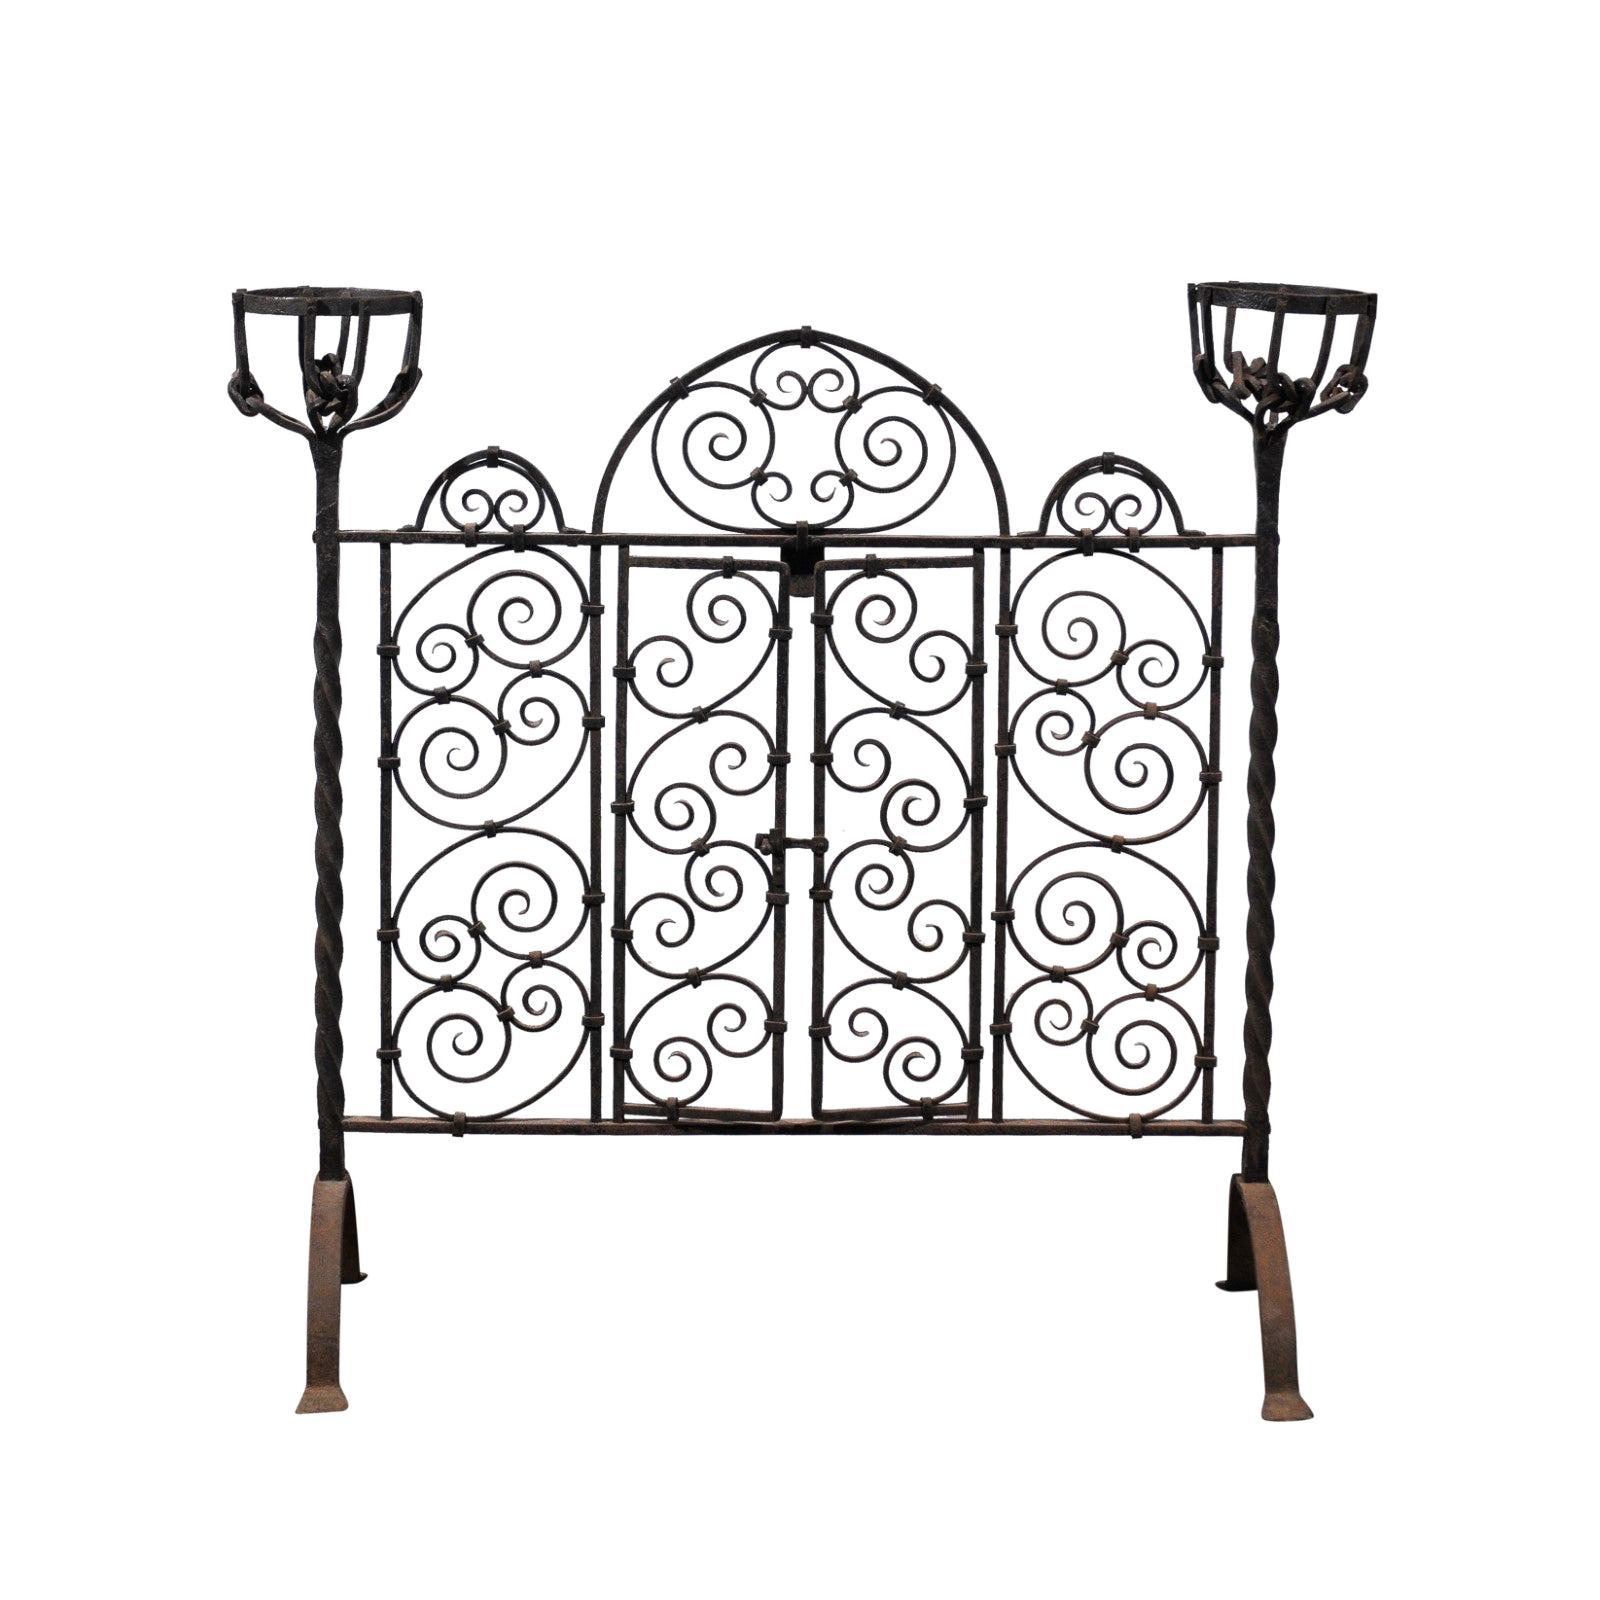 French Wrought Iron Freestanding Firescreen with Warming Holders, circa 1880 For Sale